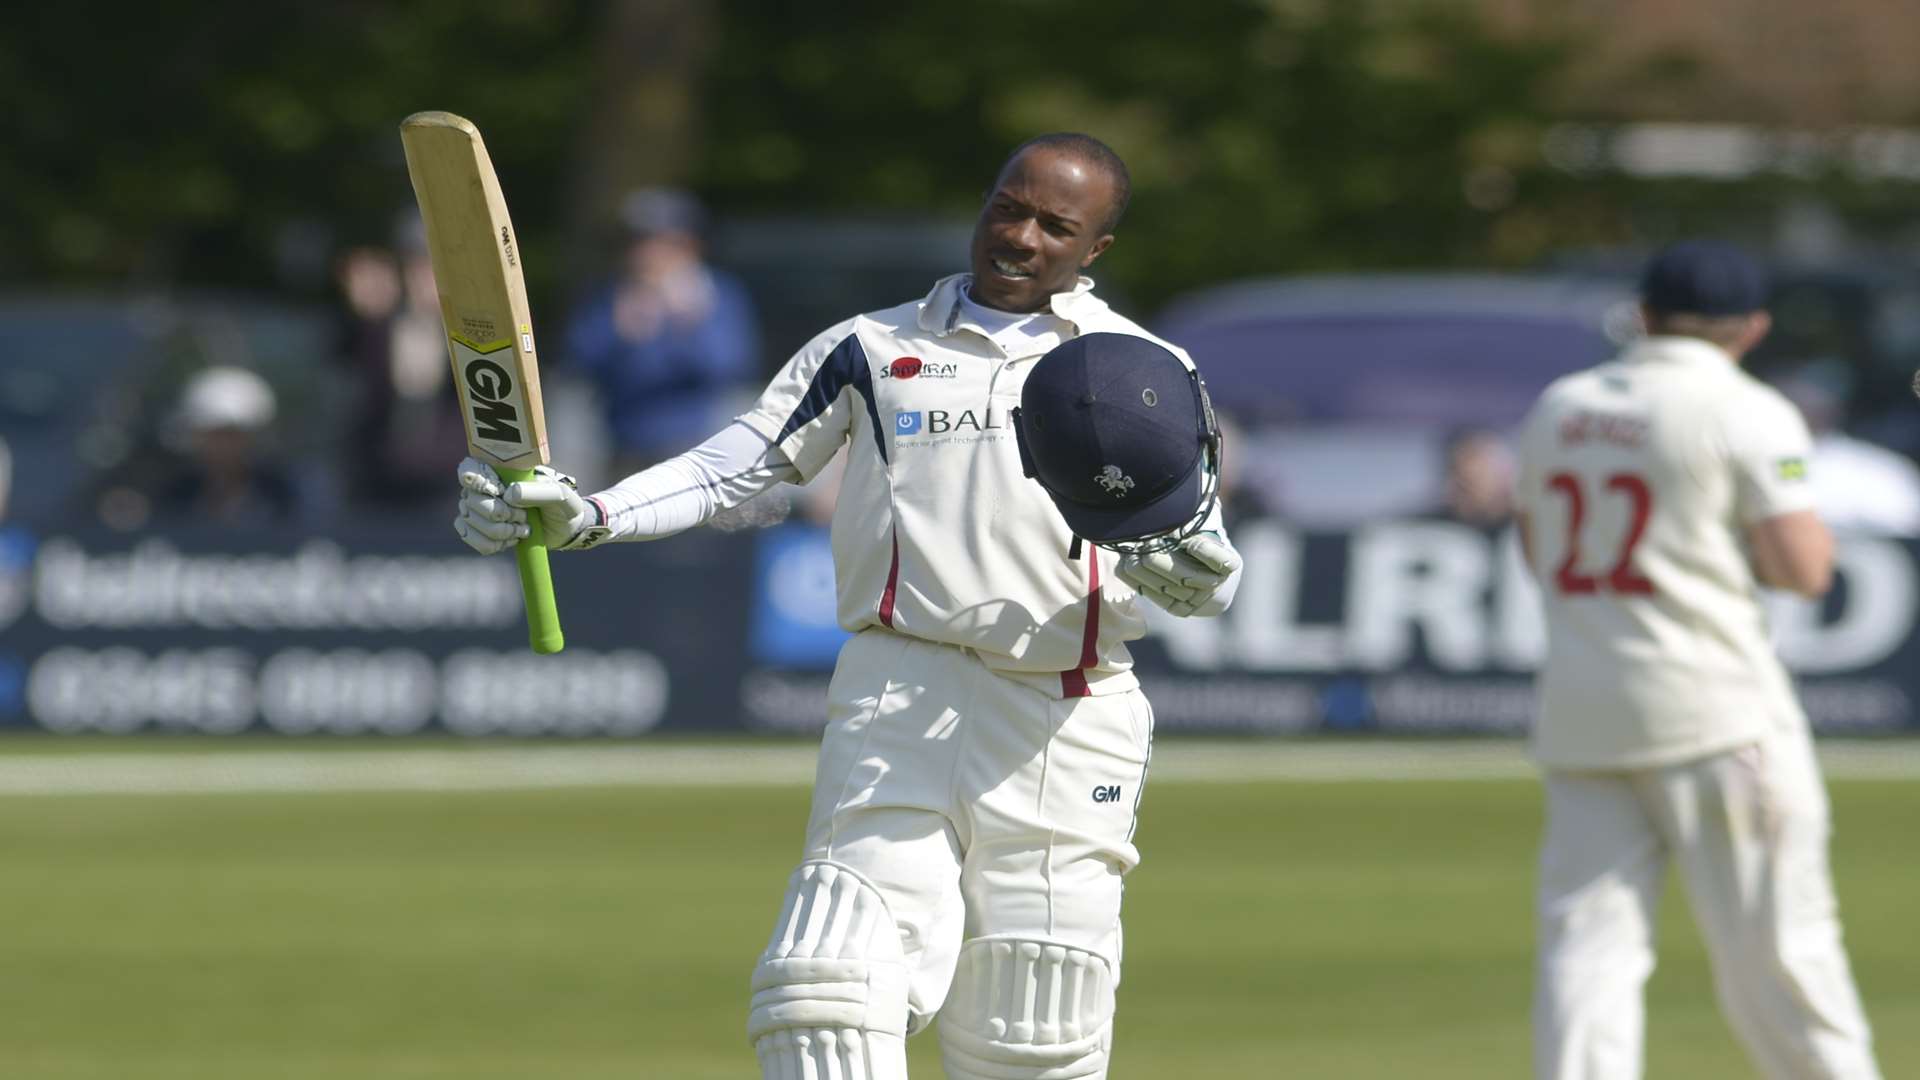 Daniel Bell-Drummond celebrates his century against Glamorgan. Picture: Barry Goodwin.